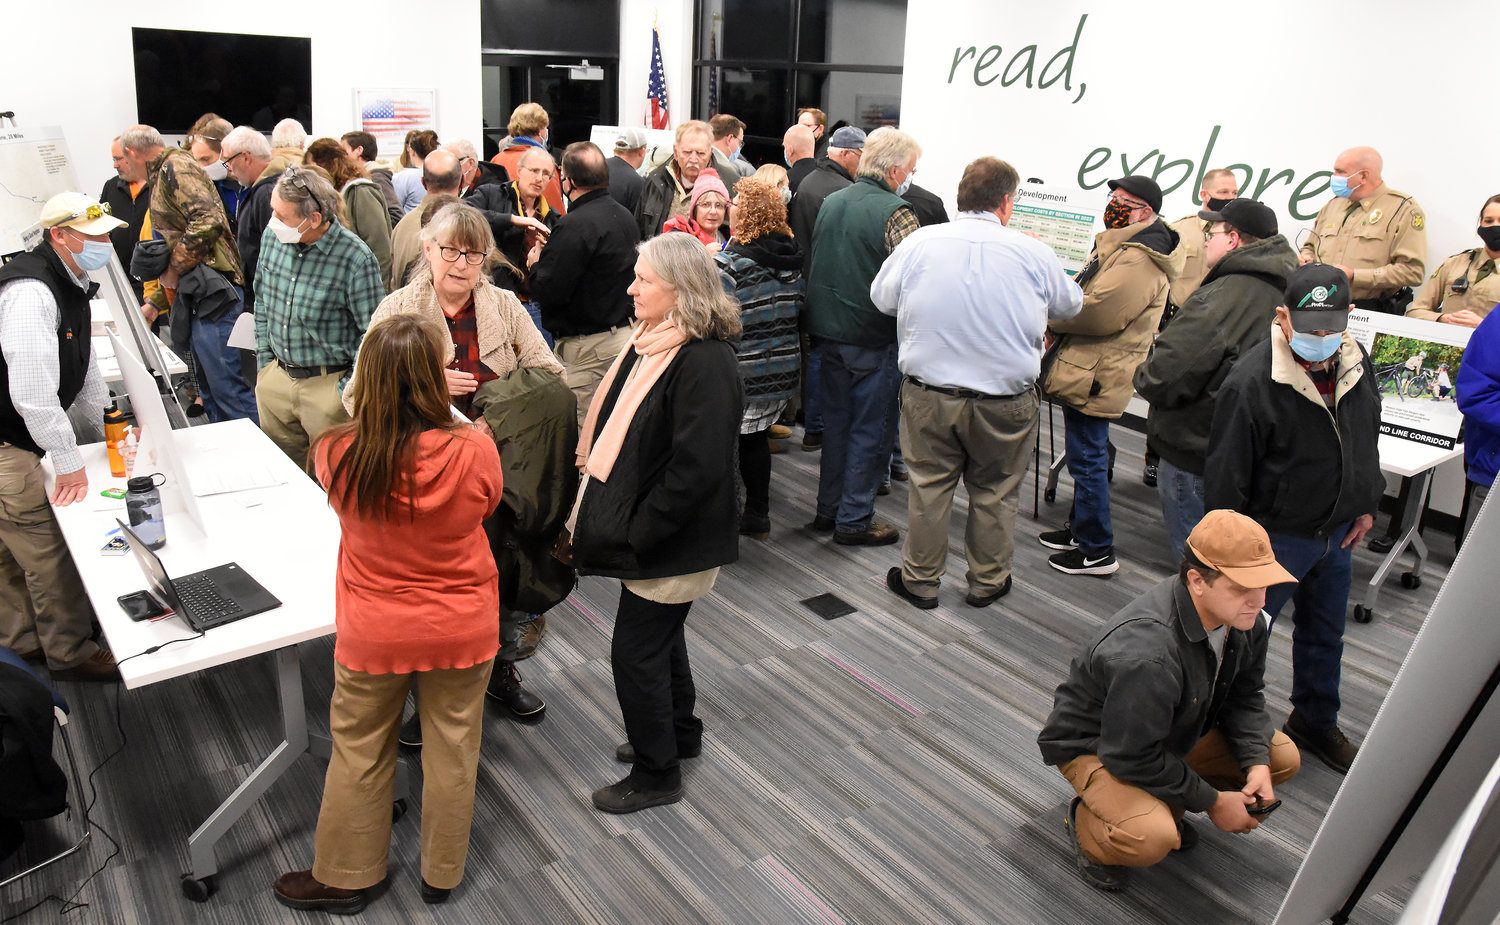 An open house with informational displays presented by state agencies including DNR and State Parks (below) drew 83 visitors to the Owensville branch of Scenic Regional Library’s meeting room earlier in the evening.